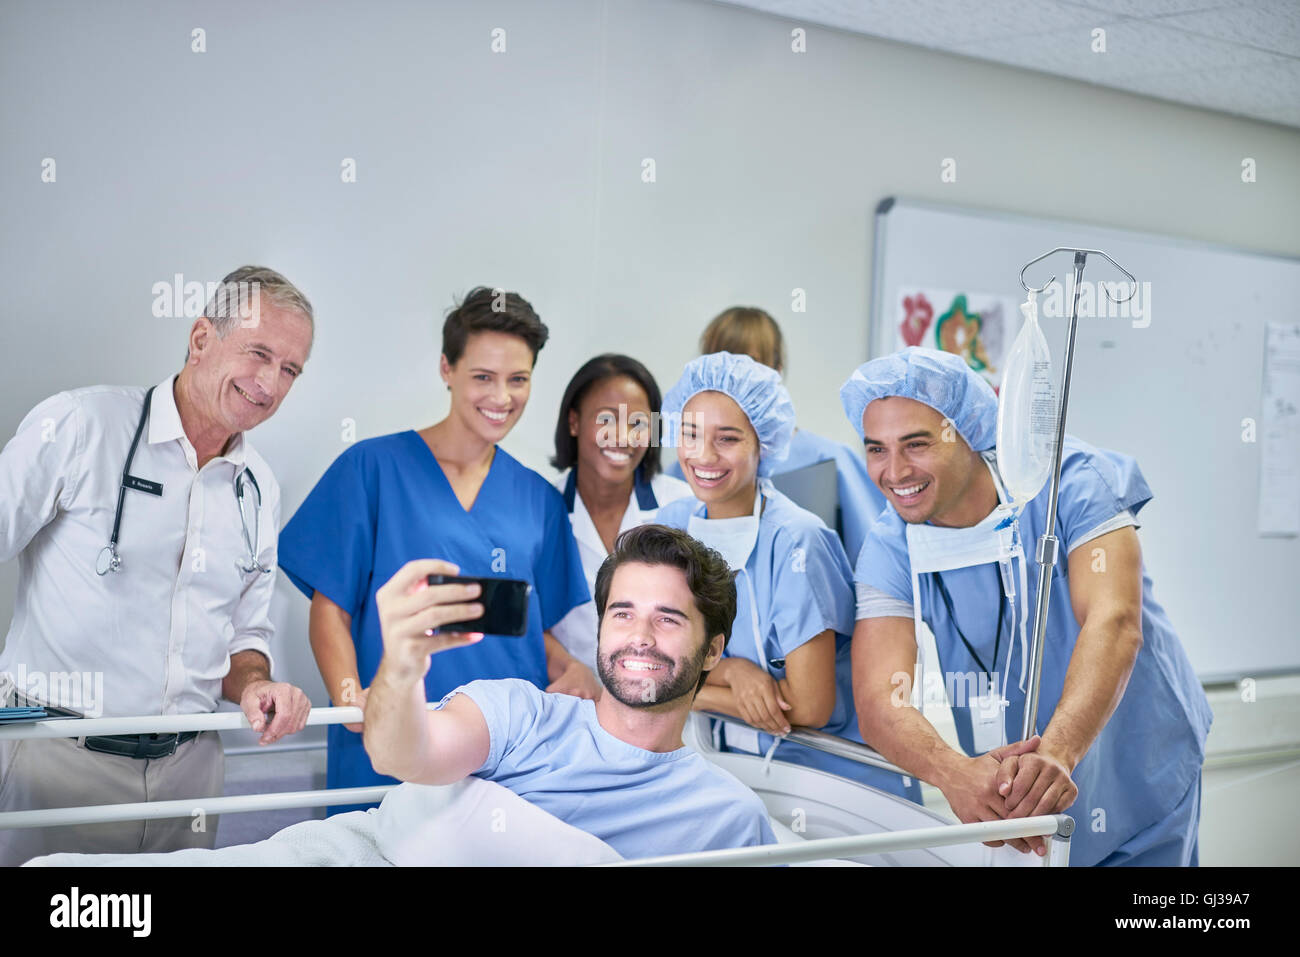 Patient in hospital bed taking selfie with doctors and nurses Stock Photo